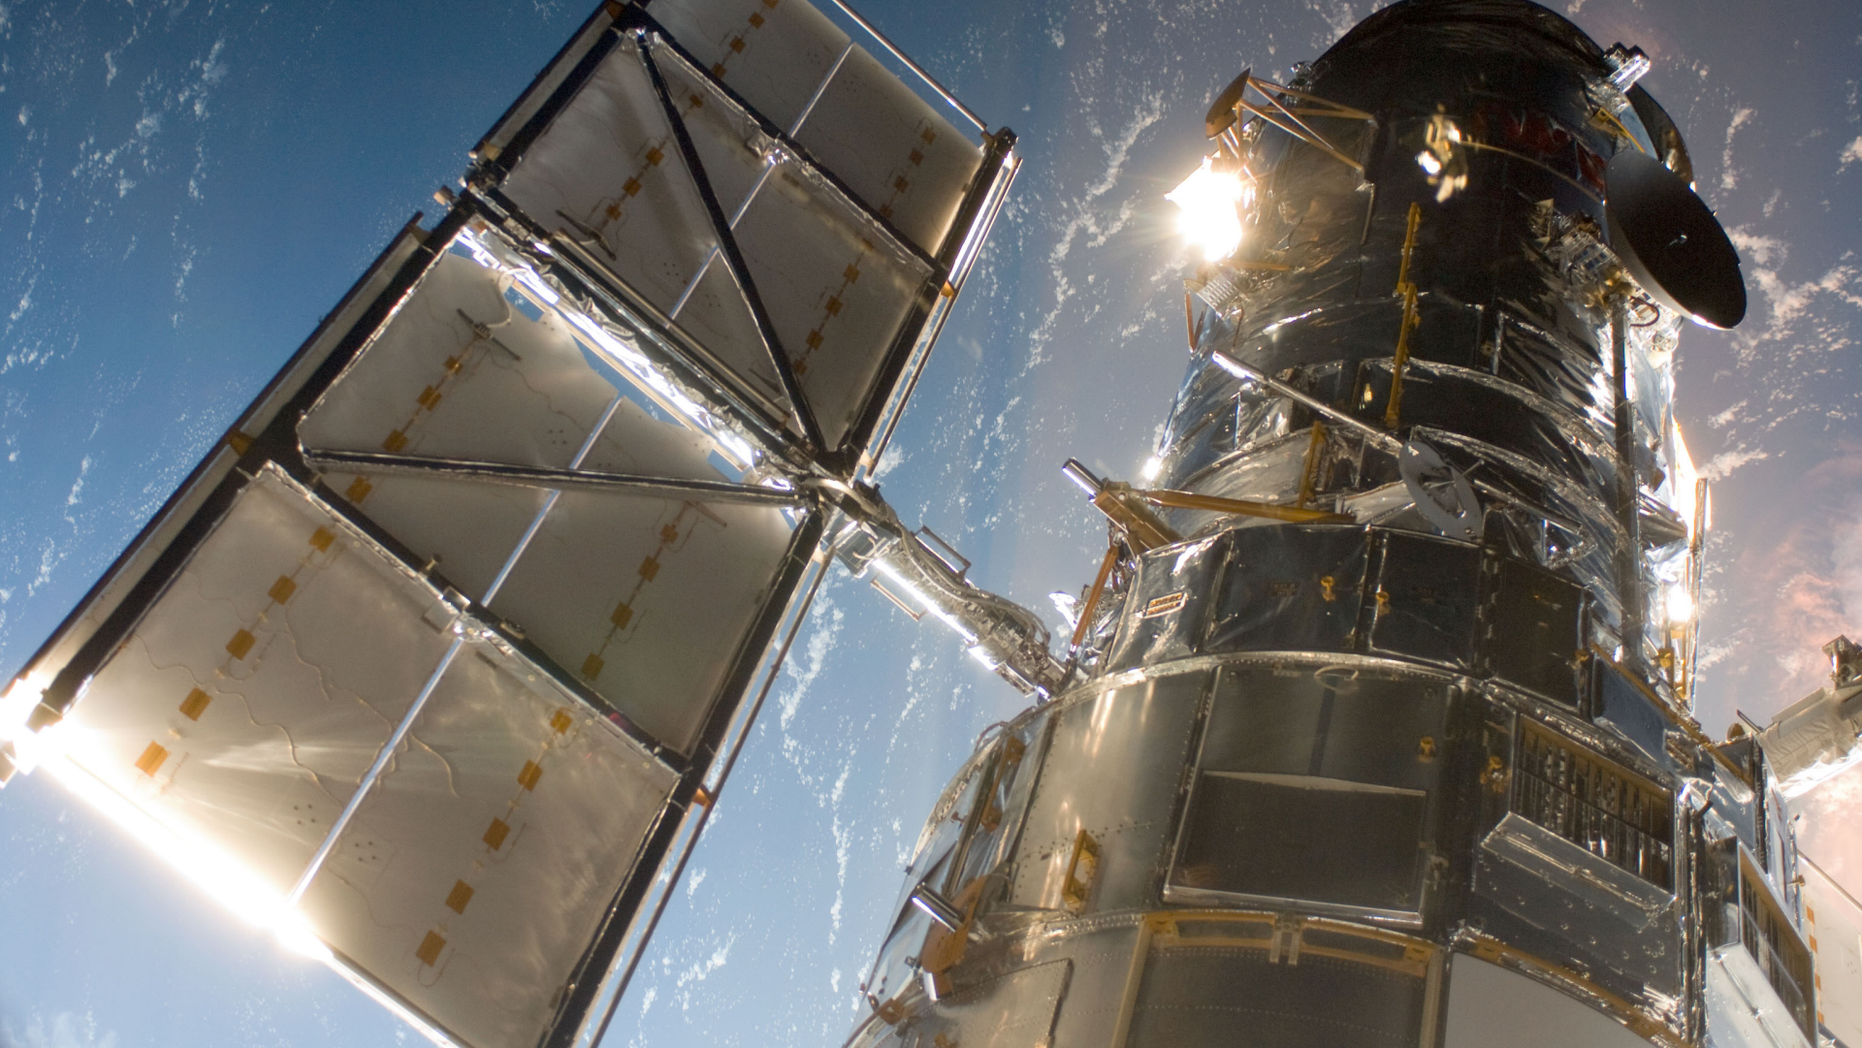 Hubble Space Telescope will last through the mid-2020s, report says